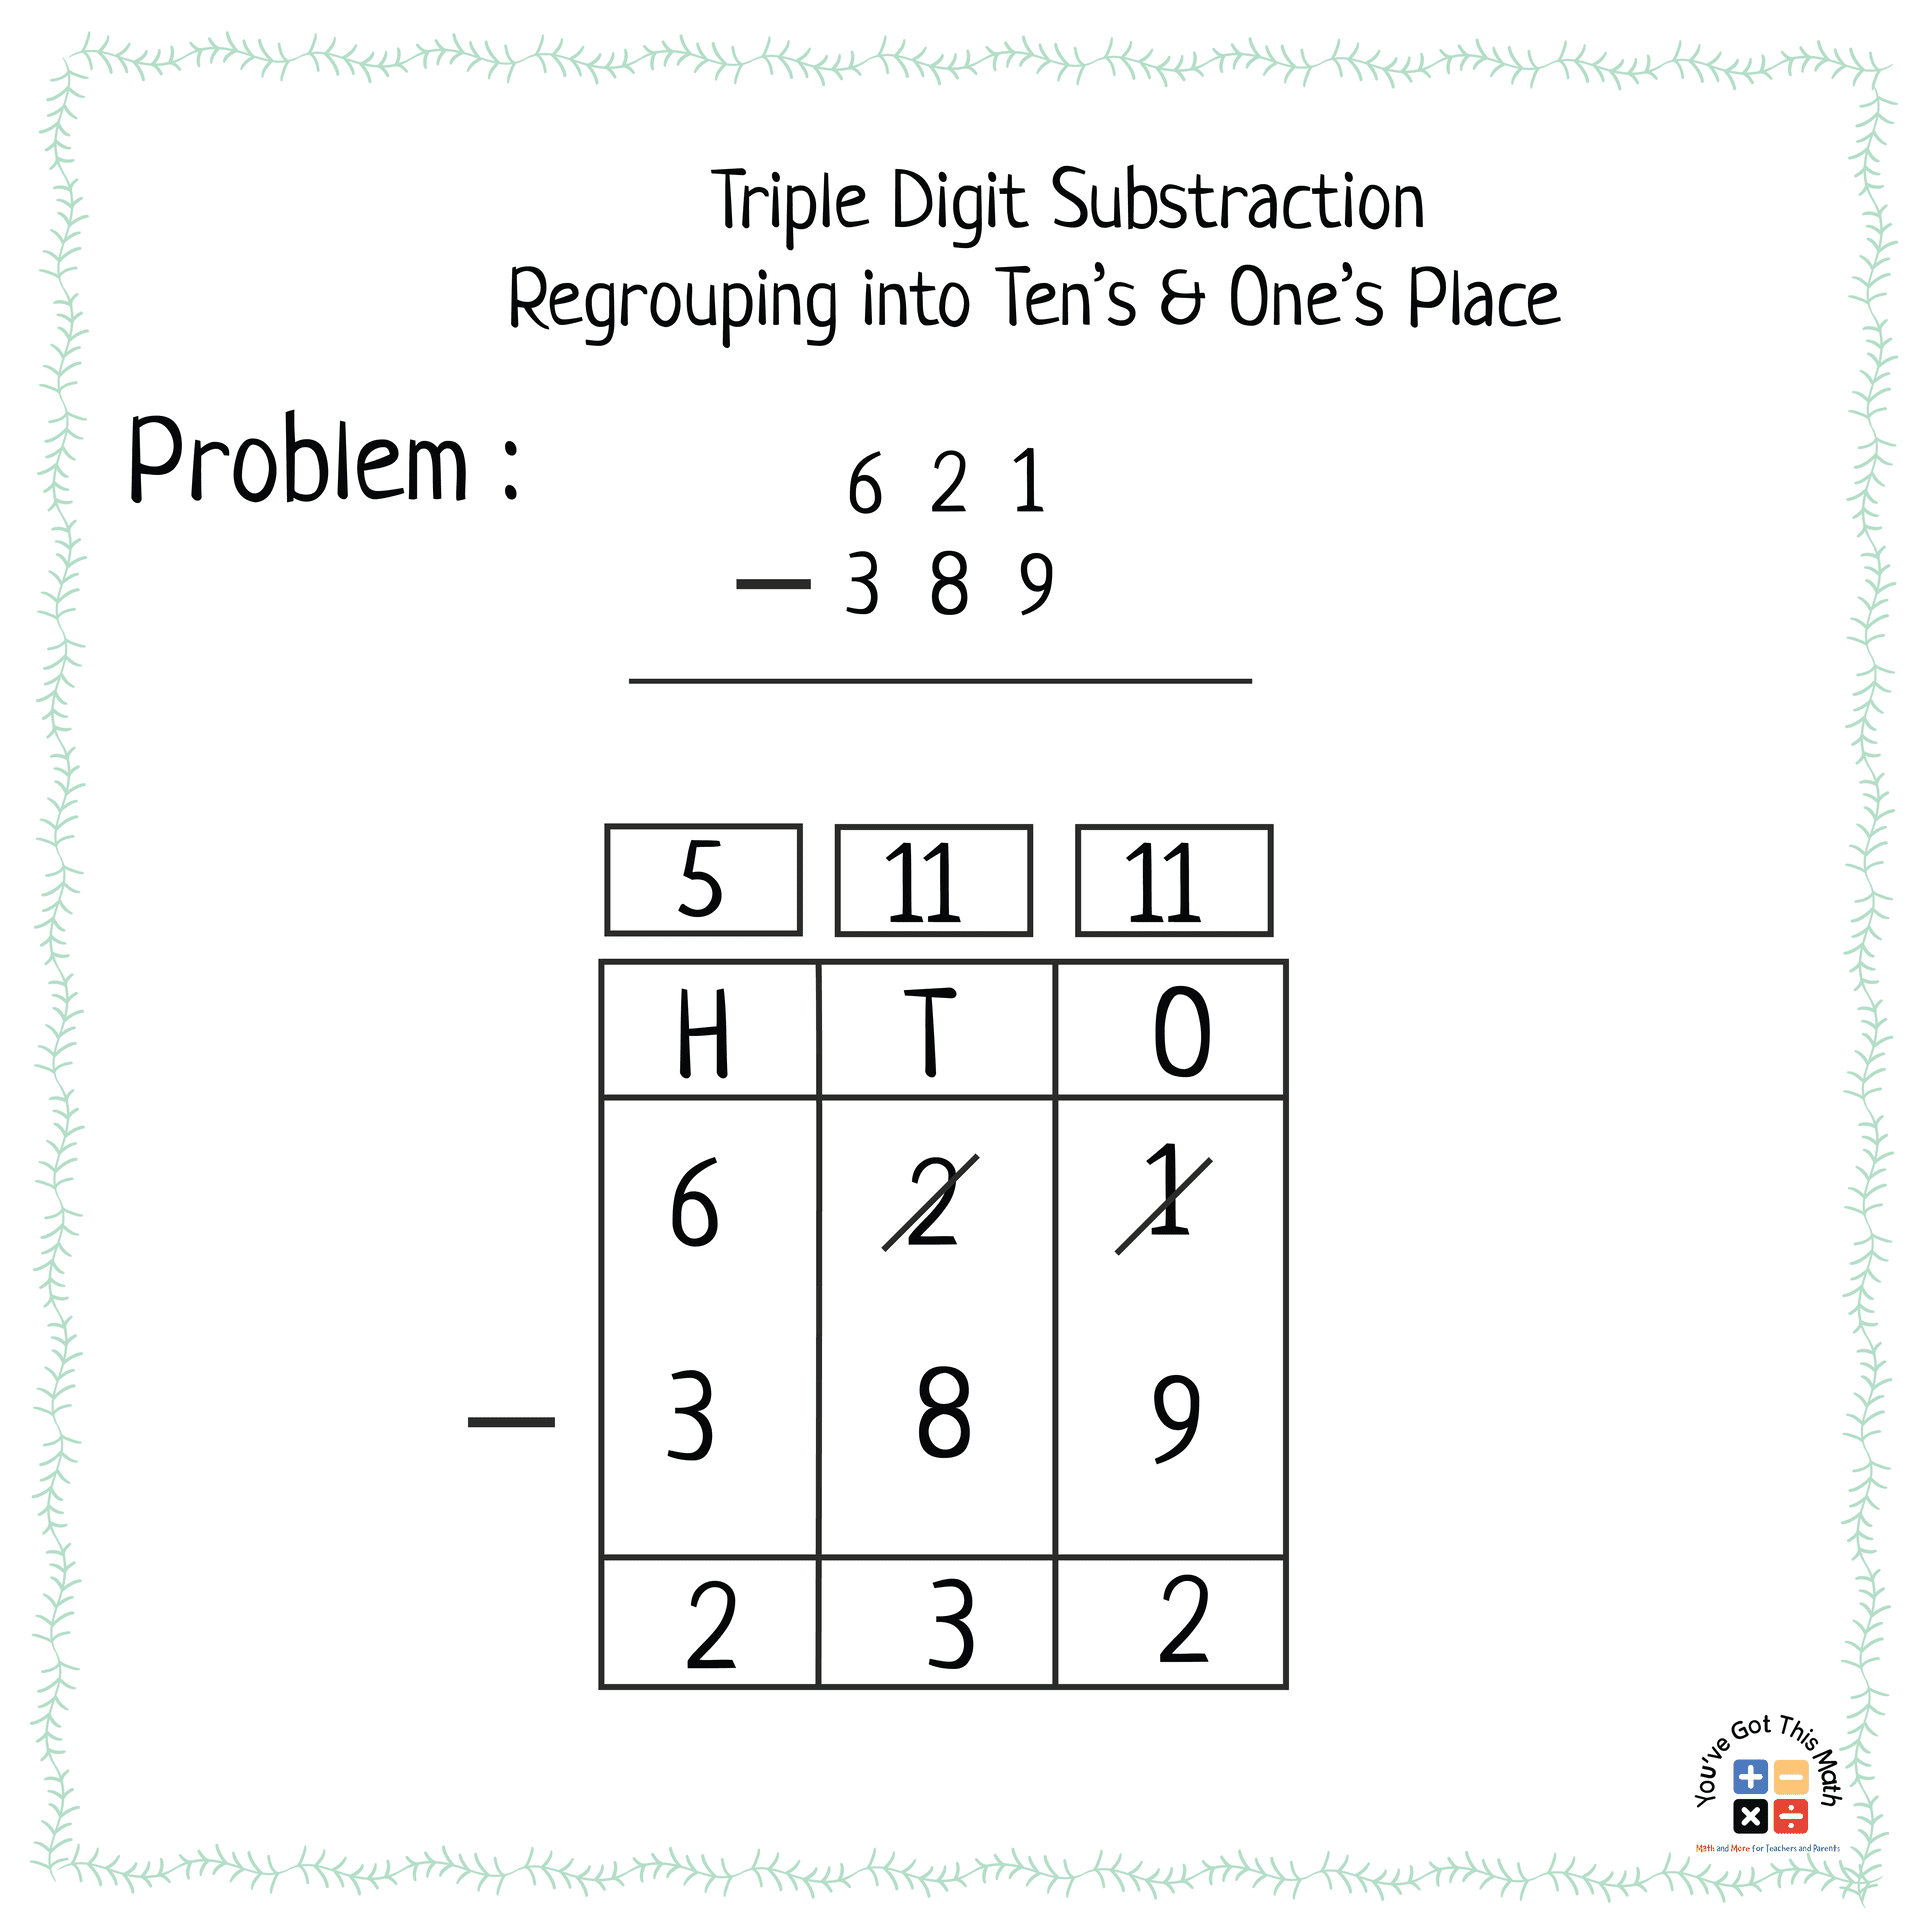 triple digit subtraction with regrouping into one’s and ten’s place